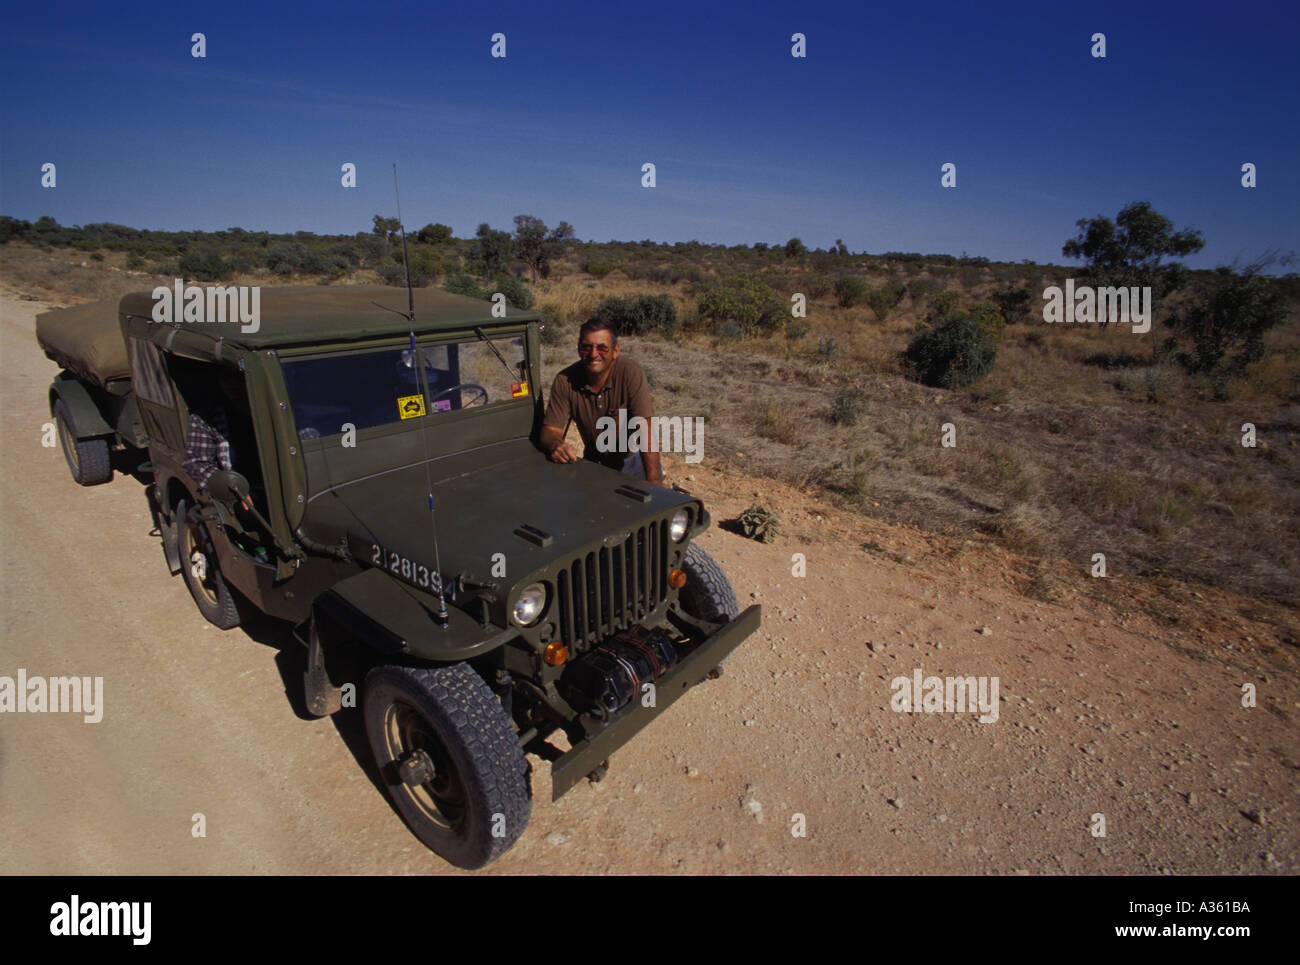 Jeep in the Outback 0144 Stock Photo